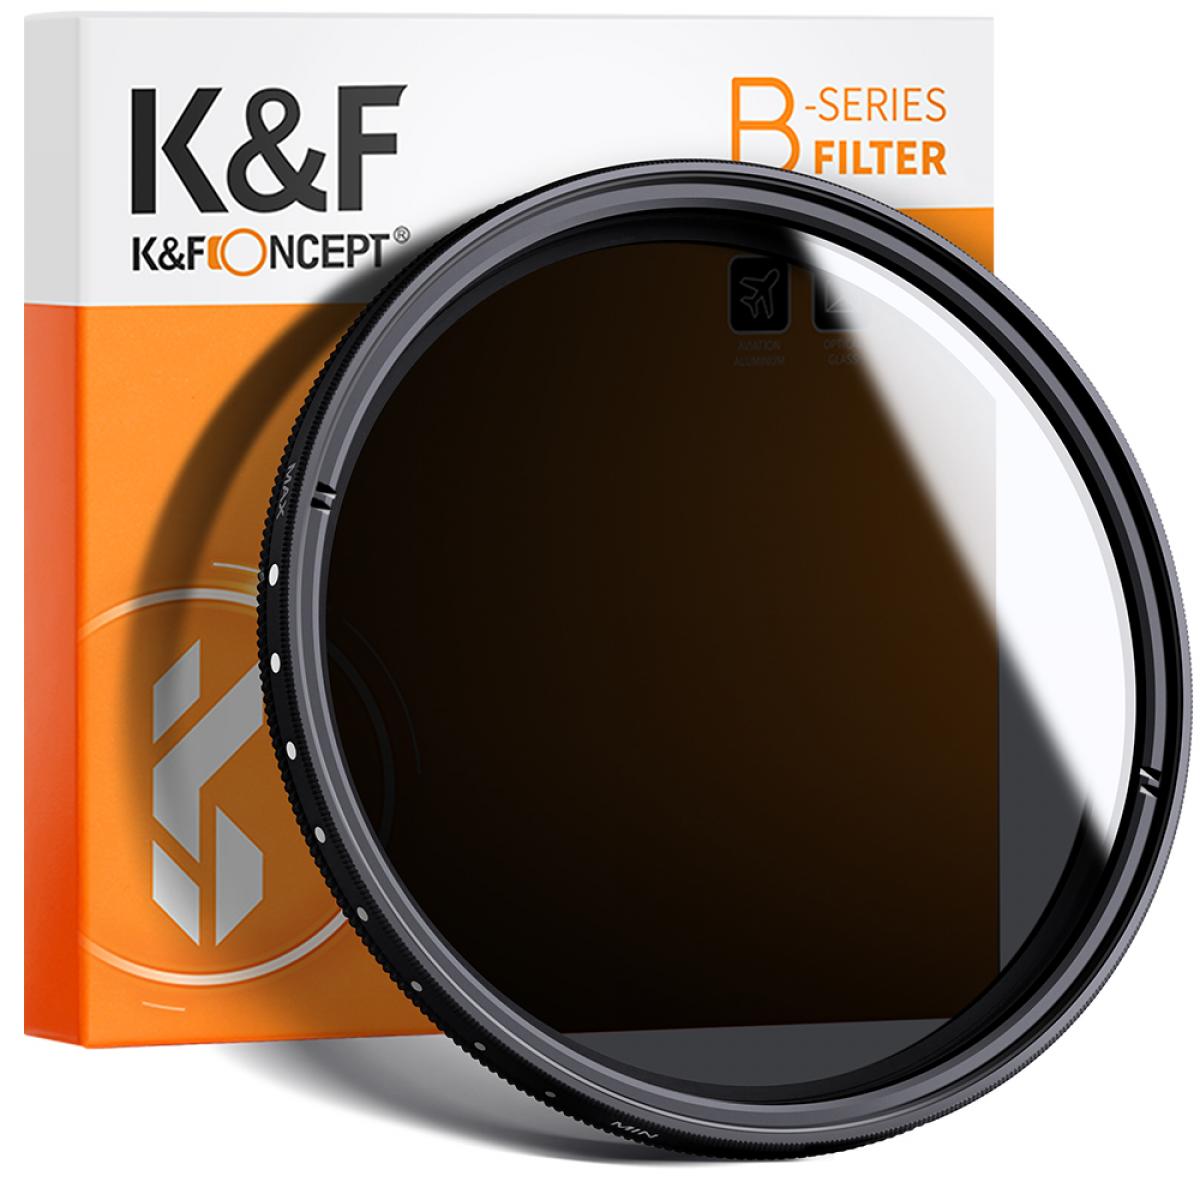 K&F 72mm ND2 to ND400 Variable Neutral Density Lens Filter K&F Concept Filter - Neutral Density